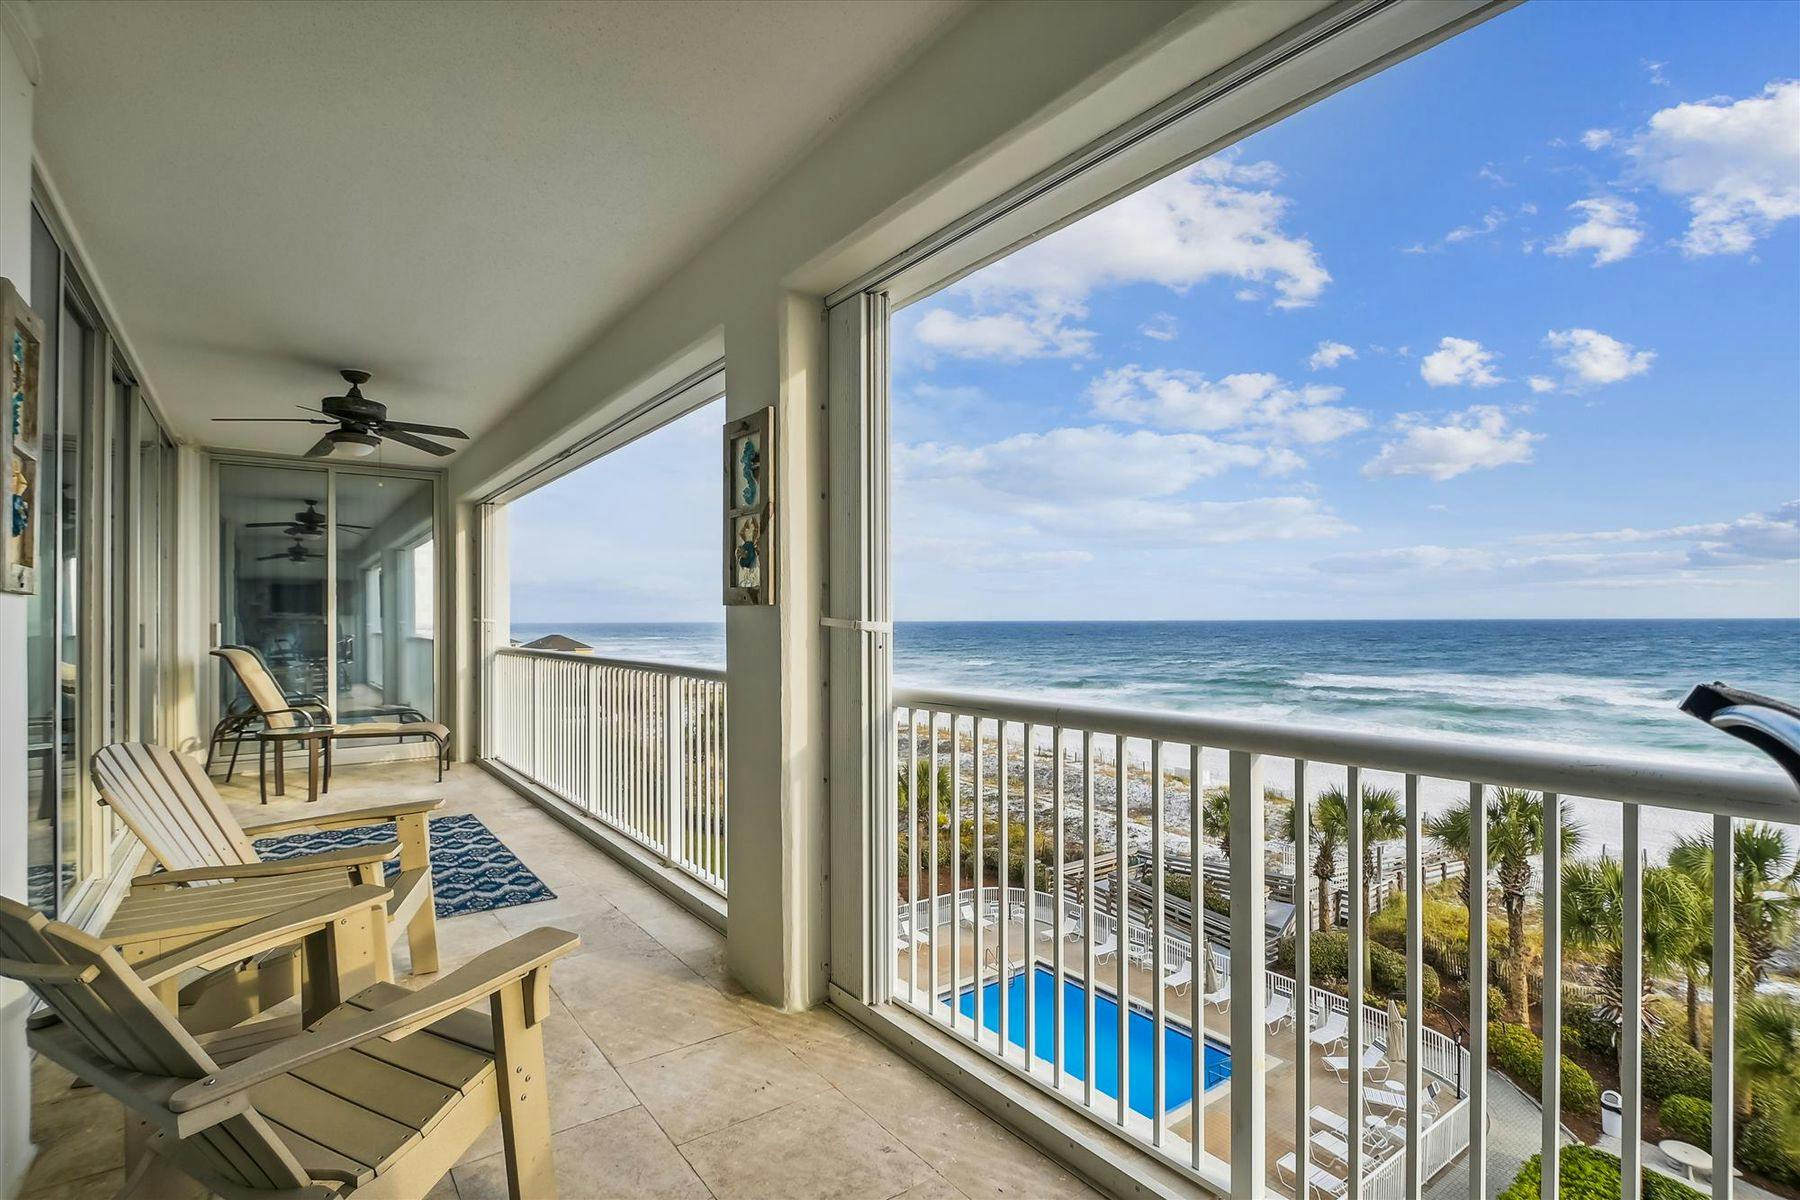 Balcony views from a Holiday Isle vacation rental in Destin, FL